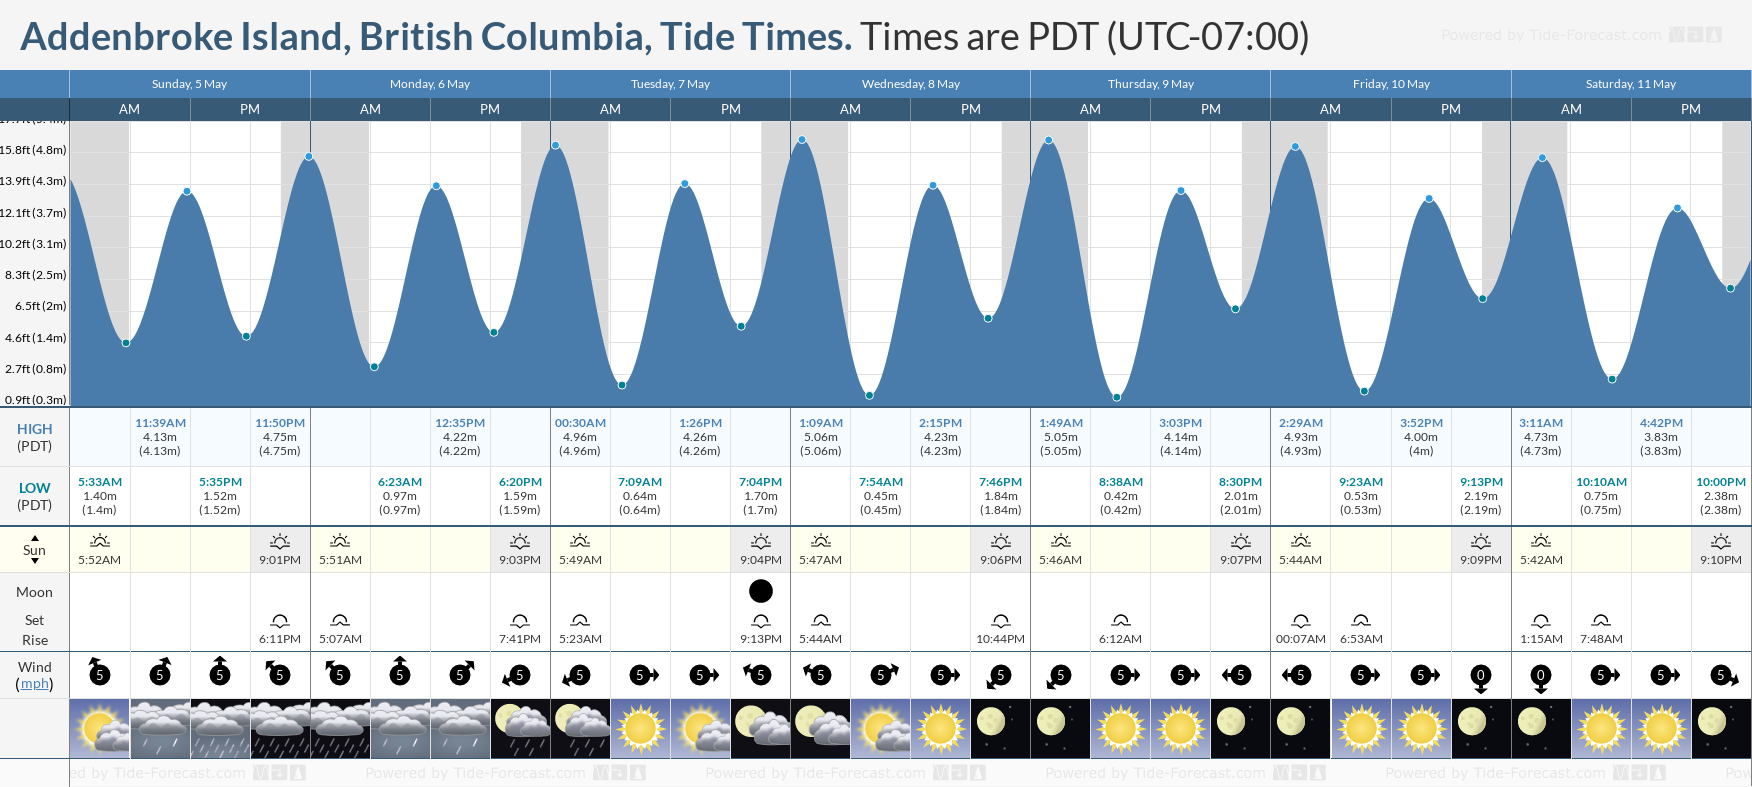 Addenbroke Island, British Columbia Tide Chart including high and low tide tide times for the next 7 days